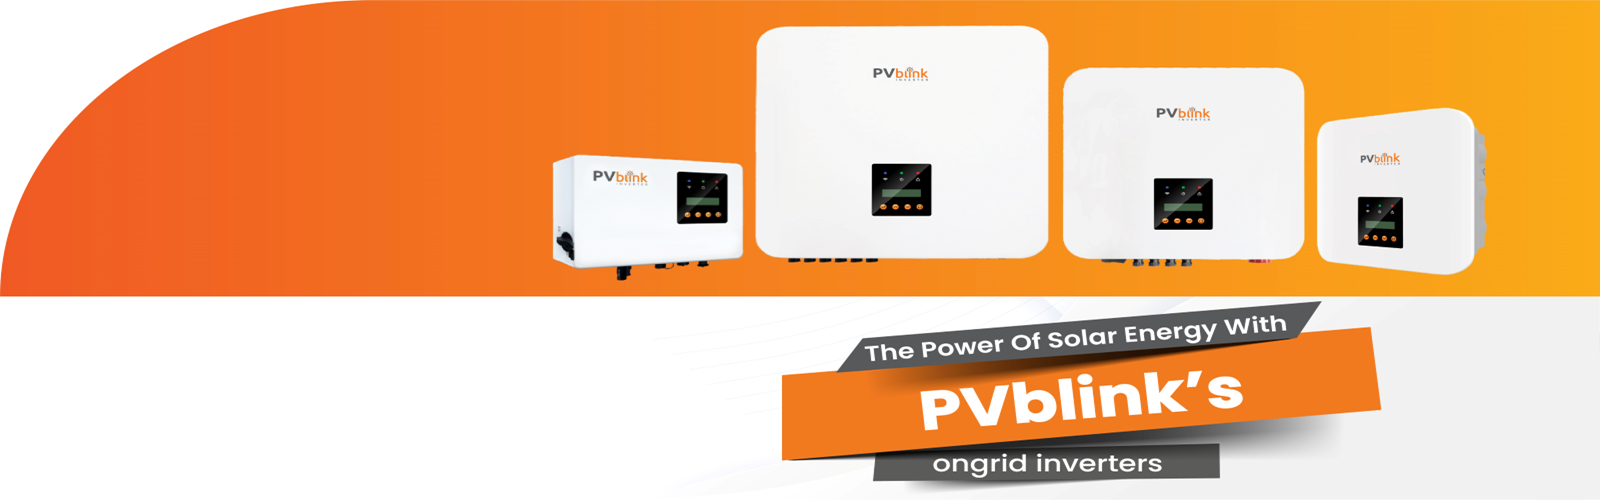  The Power of Solar Energy with PVblink's On-Grid Inverters